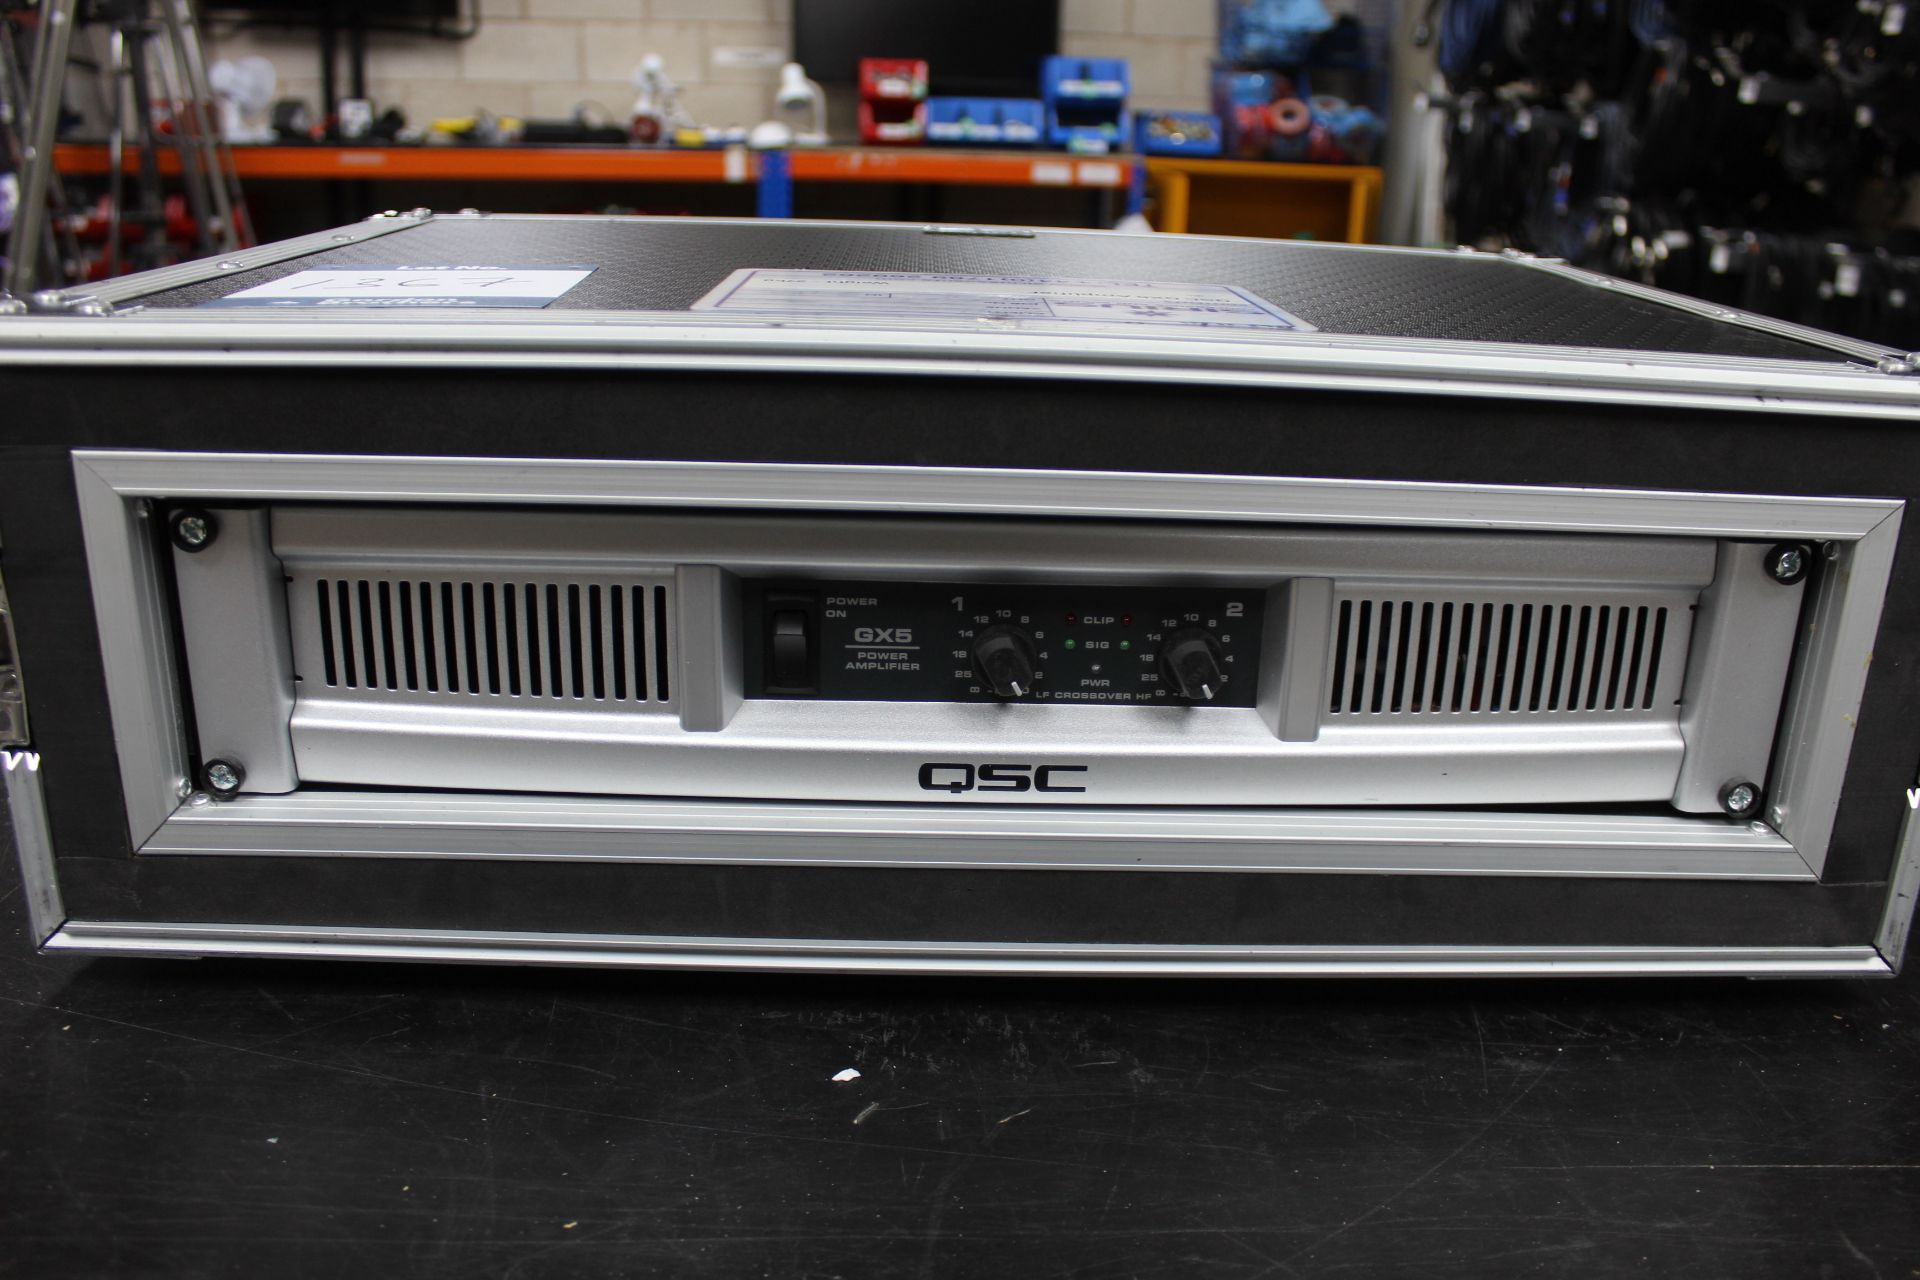 QSC GX5 amplifier, Serial No. 111626478 with 1x IEC in flight case (Purchased in 2018 for £297).